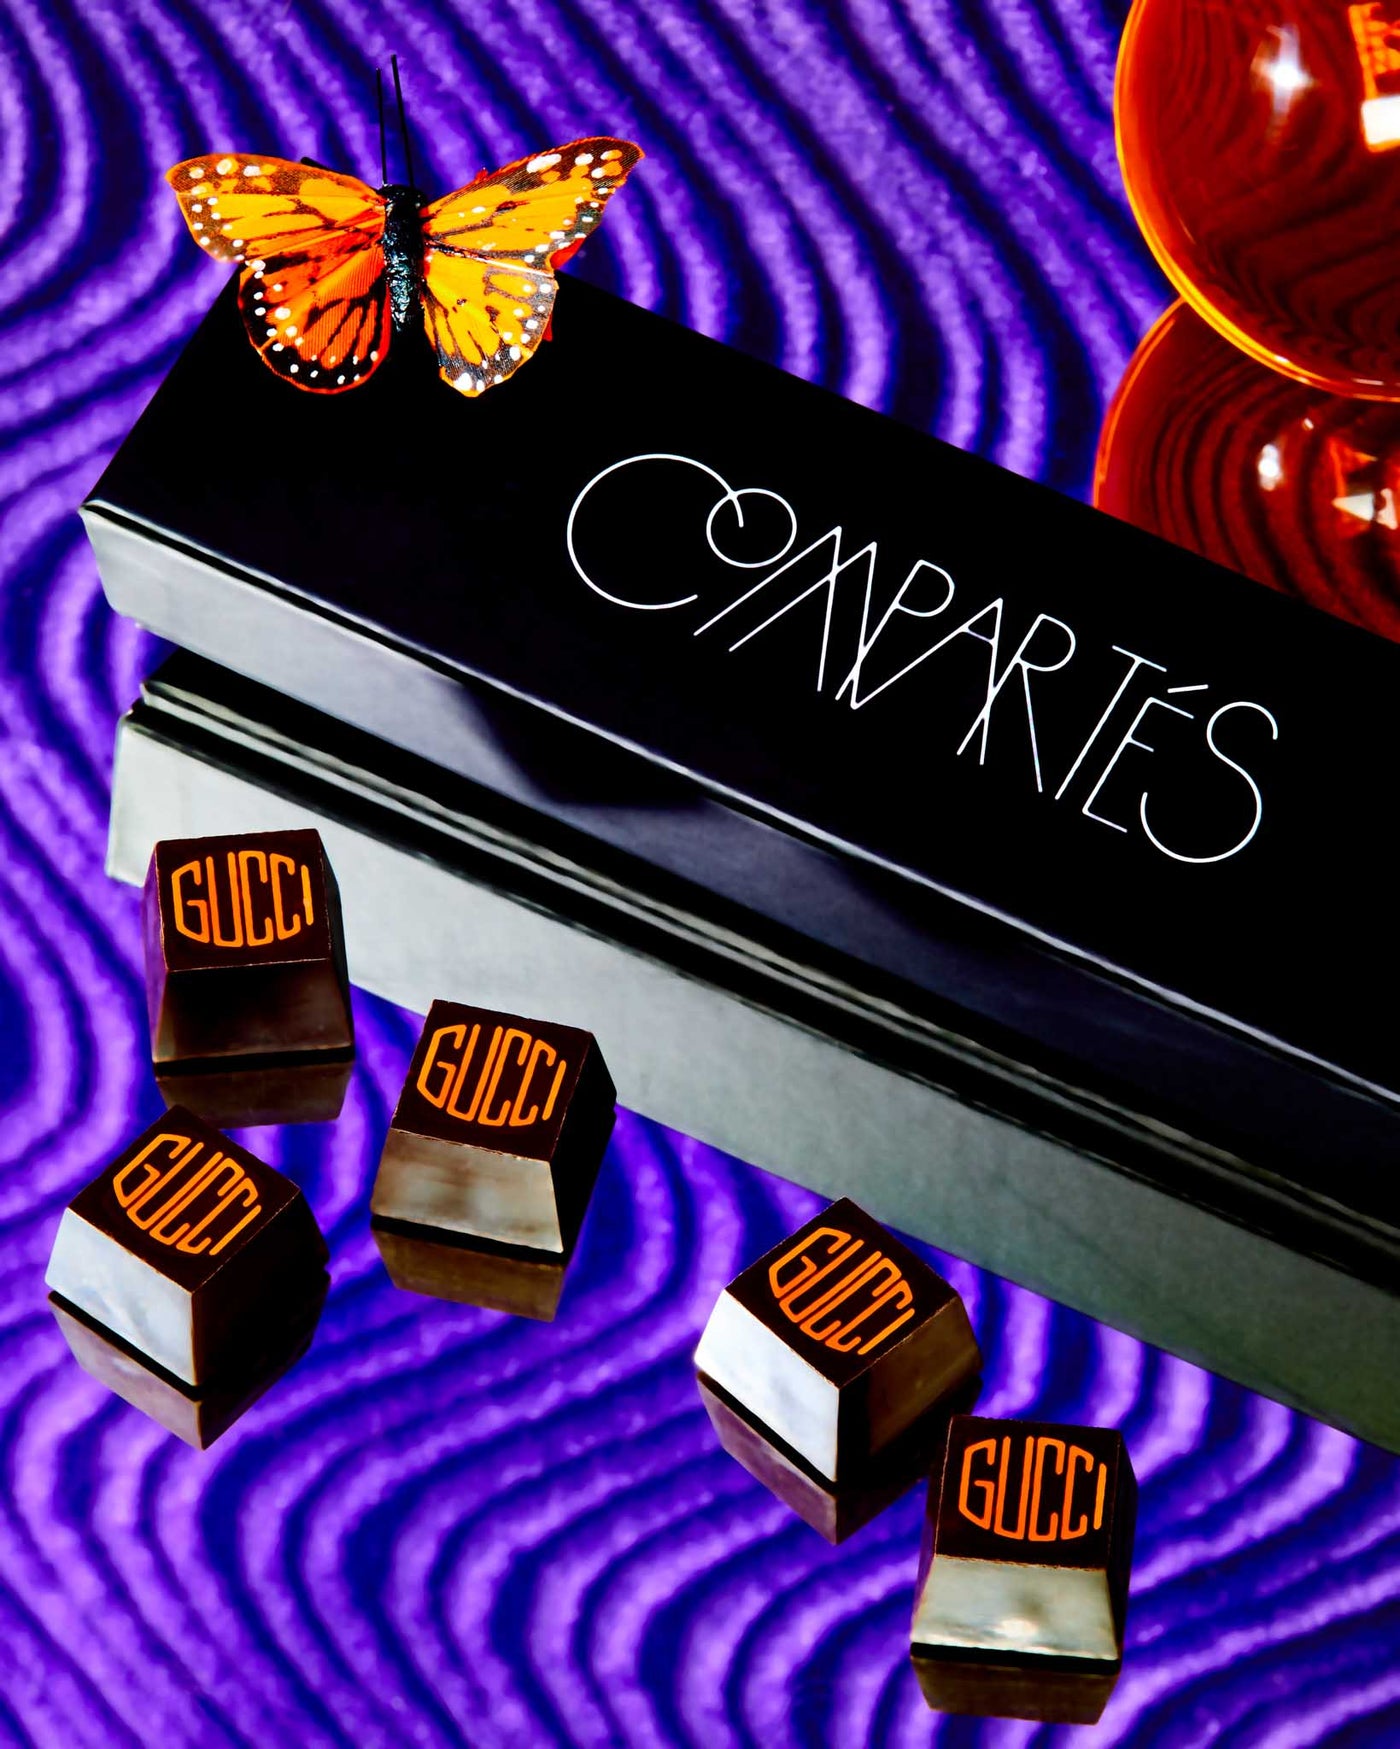 Compartes branded chocolates on top of a purple background, with a butterfly on top	